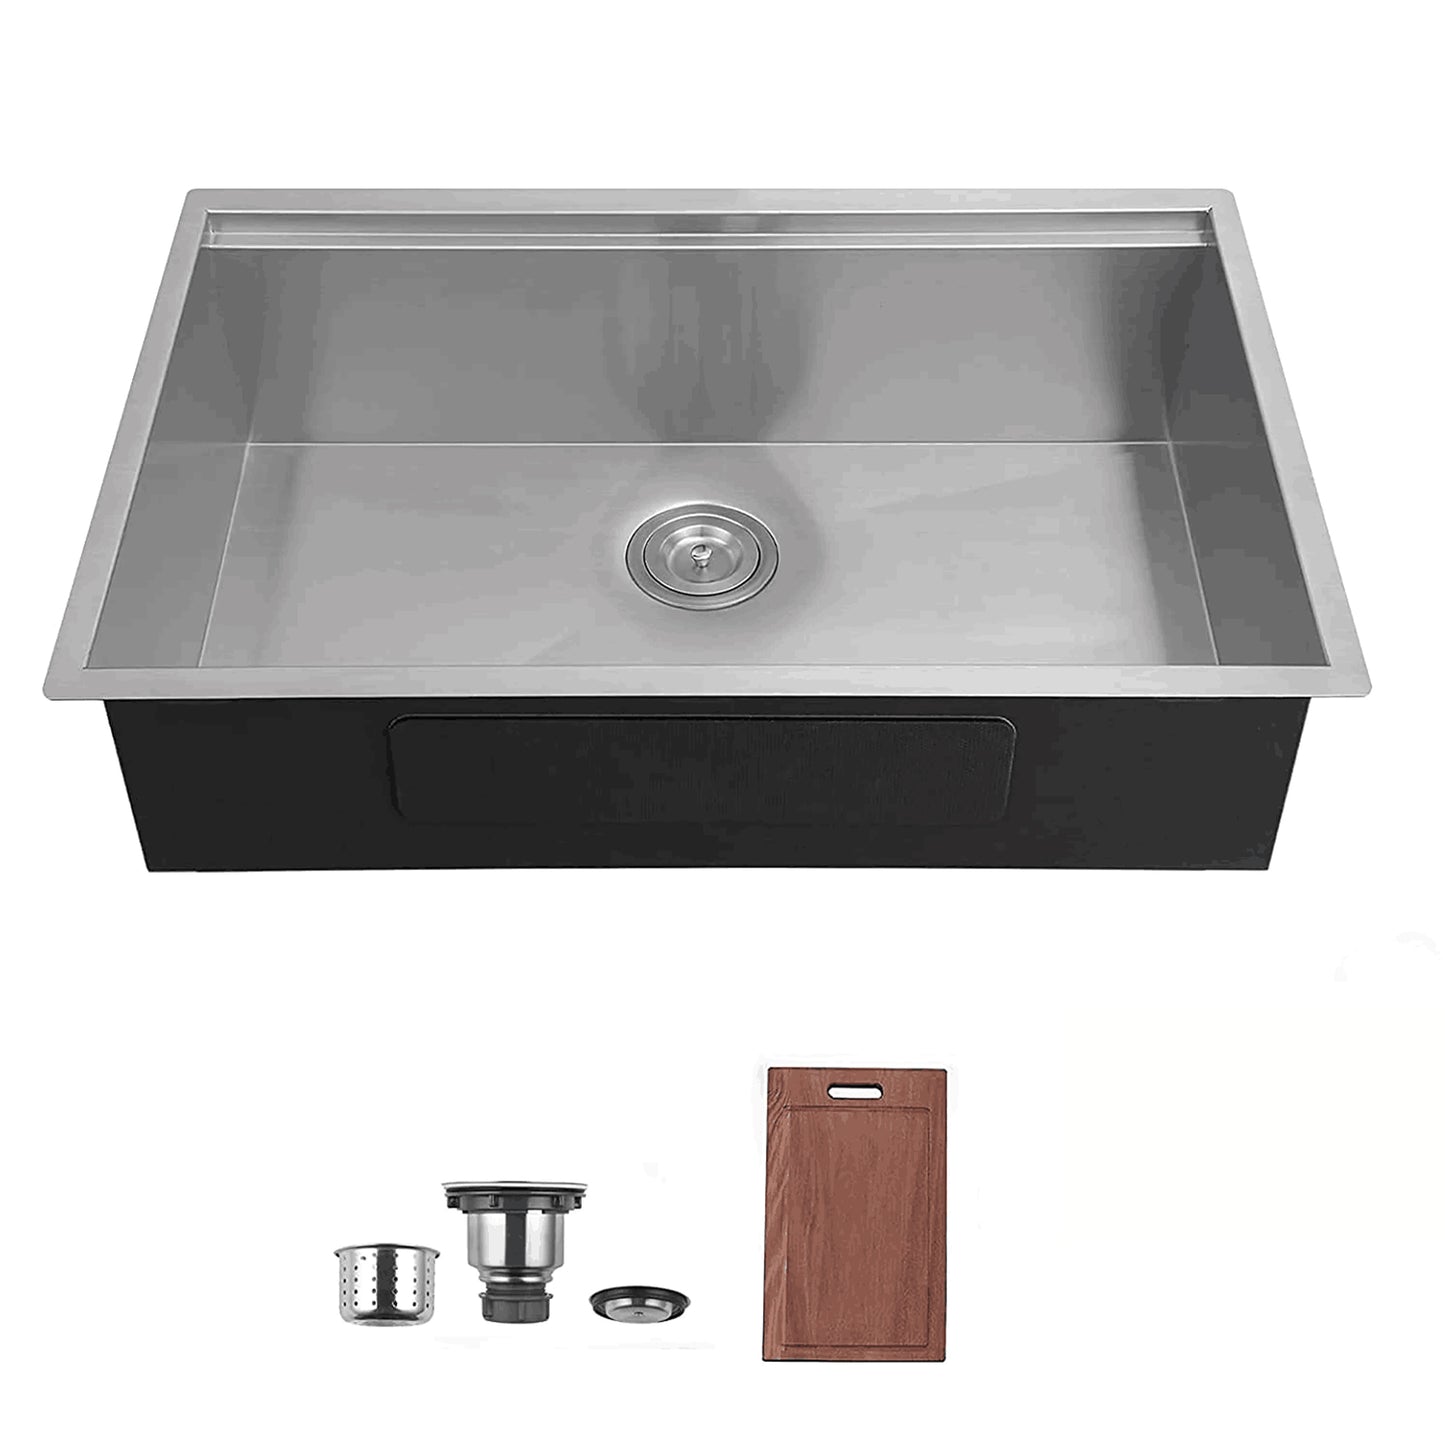 cutting board and strainer Compatible with sinks with a width of 18 inches